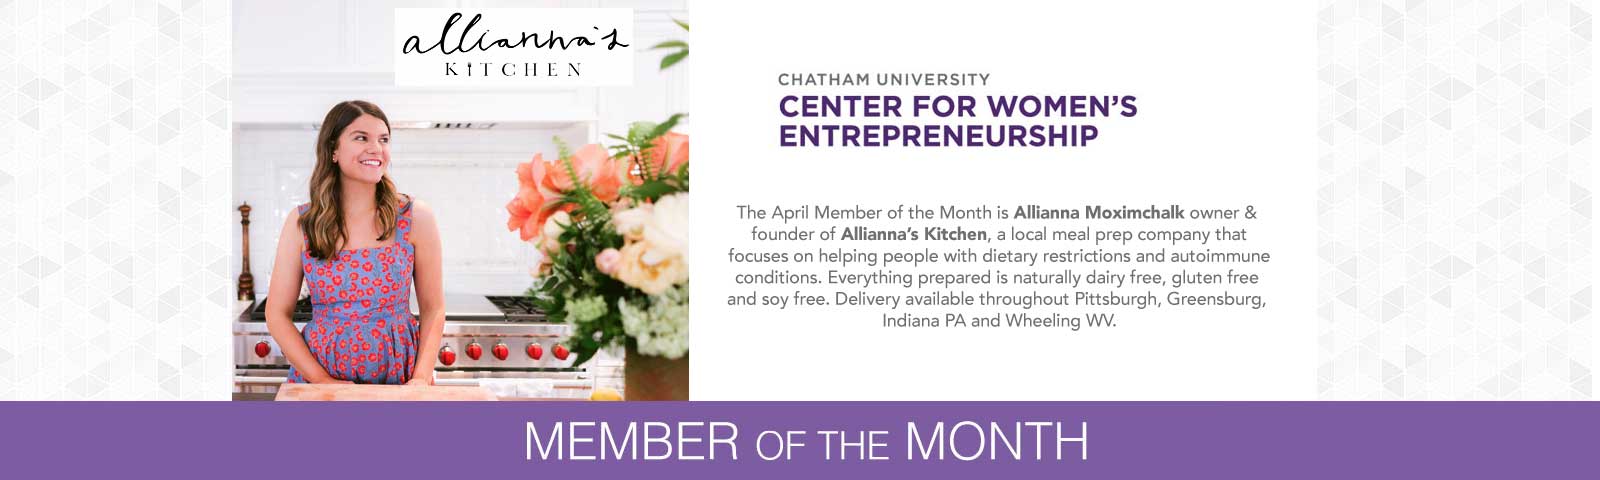 The April Member of the Month is Allianna Moximchalk owner & founder of Alliannaâ€™s Kitchen, a local meal prep company that focuses on helping people with dietary restrictions and autoimmune conditions.